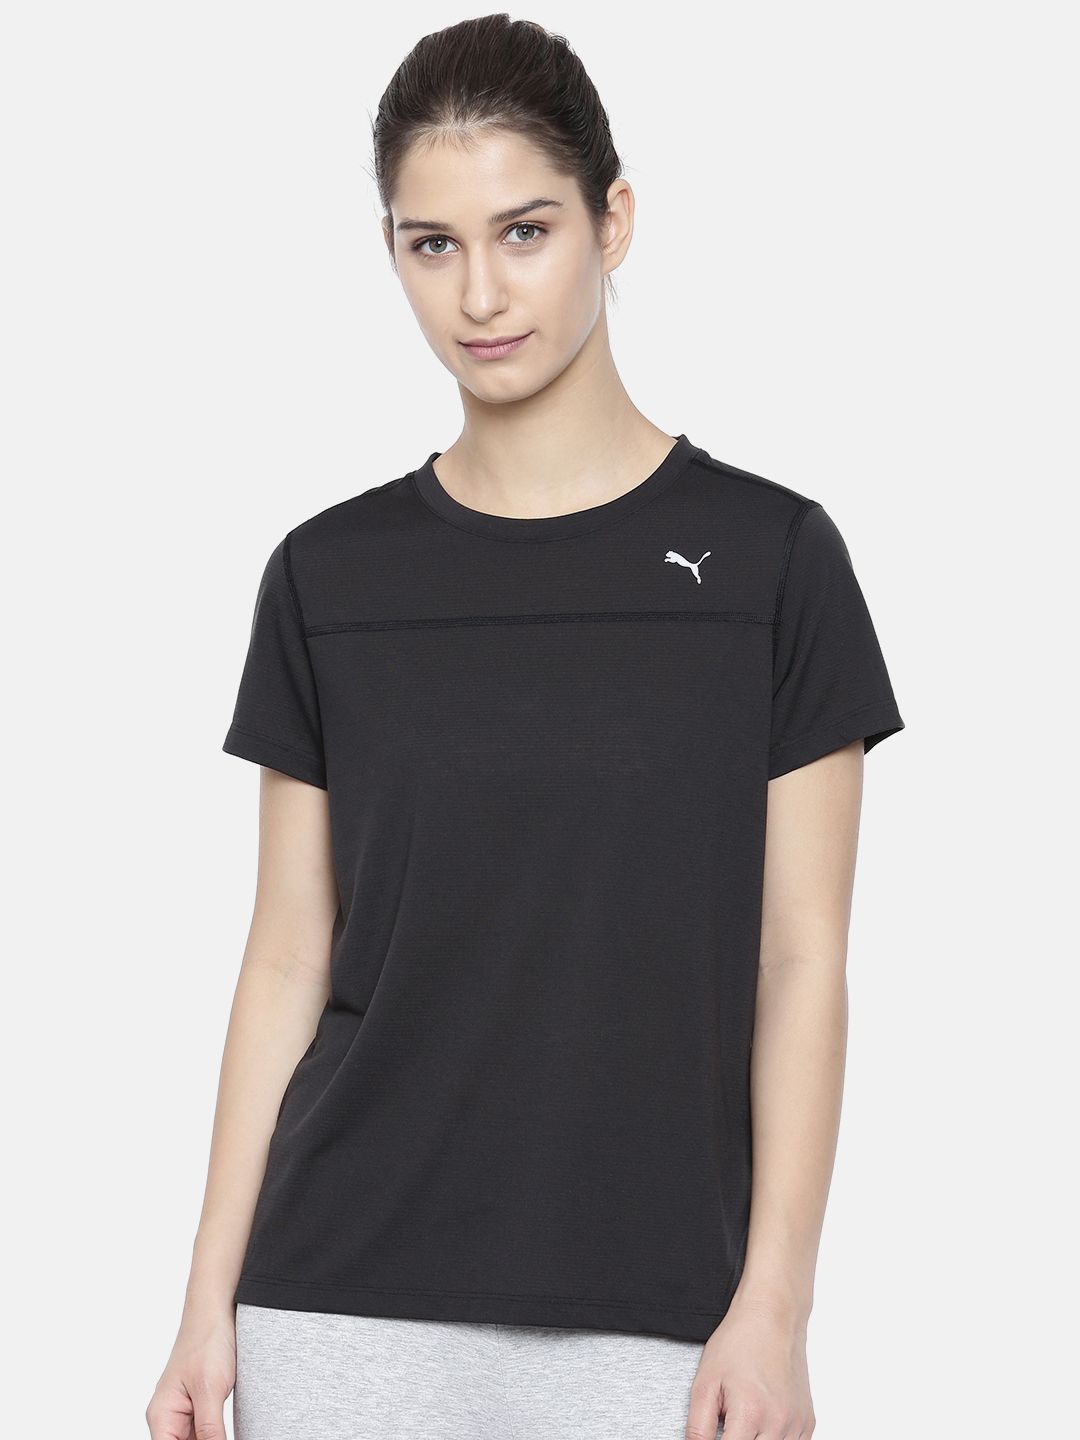 Puma Black Solid S S W Round Neck Dry-Cell T-Shirt Price in India